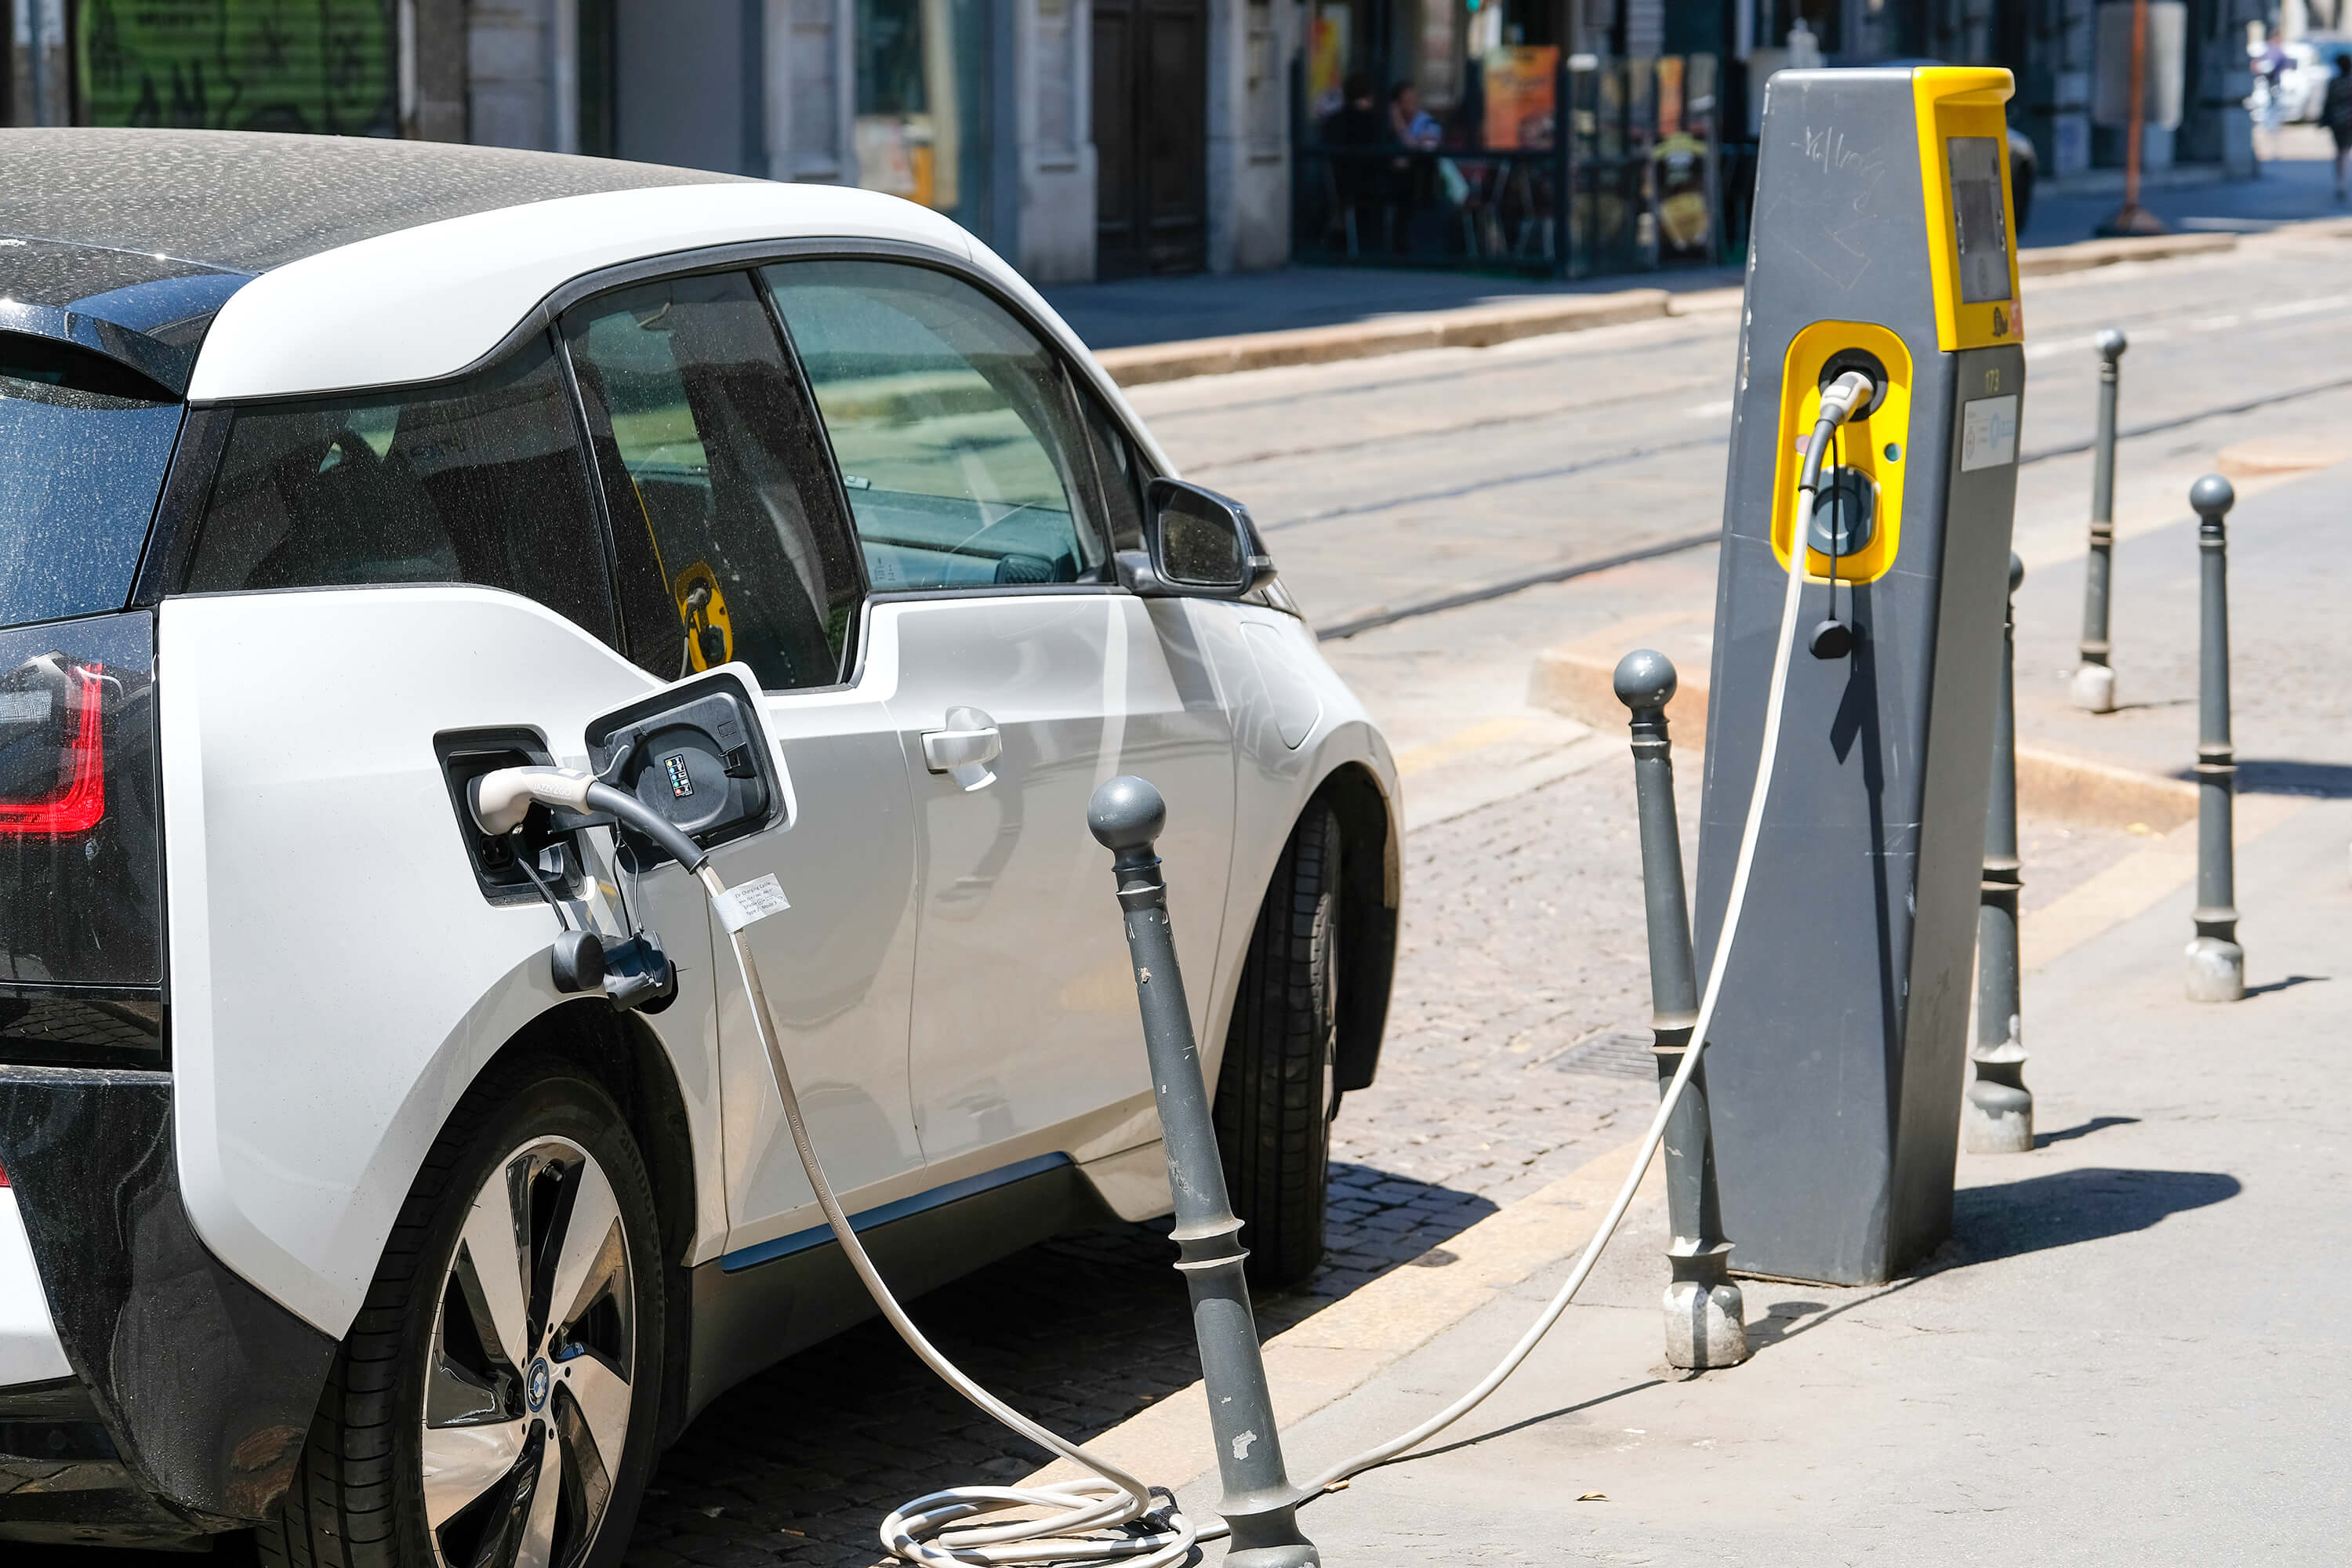 Milan, Italy - June, 19, 2017: electric car charges in Milan, Italy